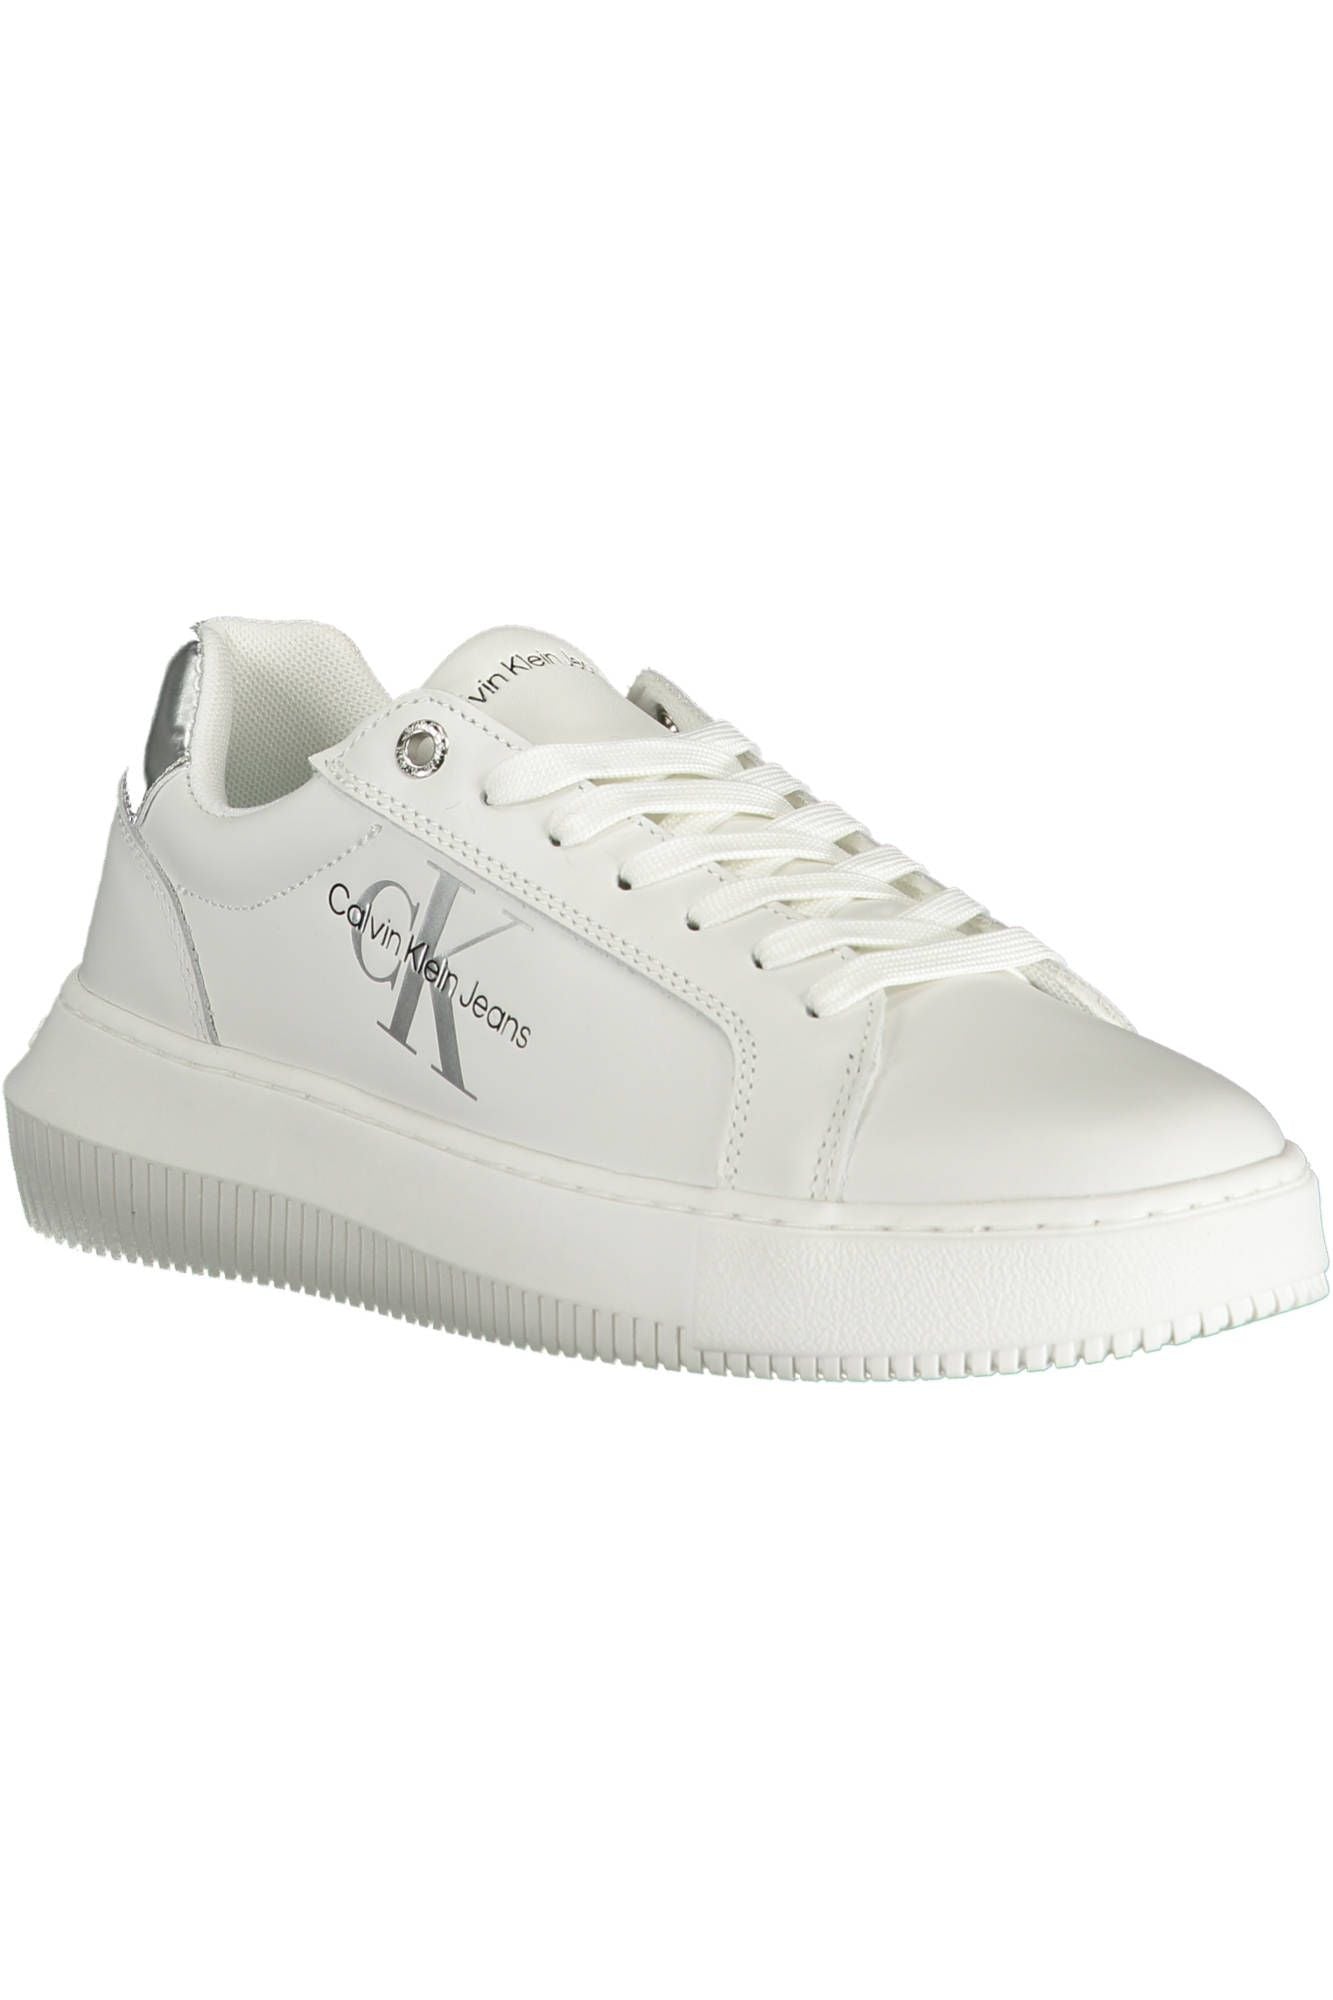 Calvin Klein Chic White Contrasting Lace-Up Sneakers